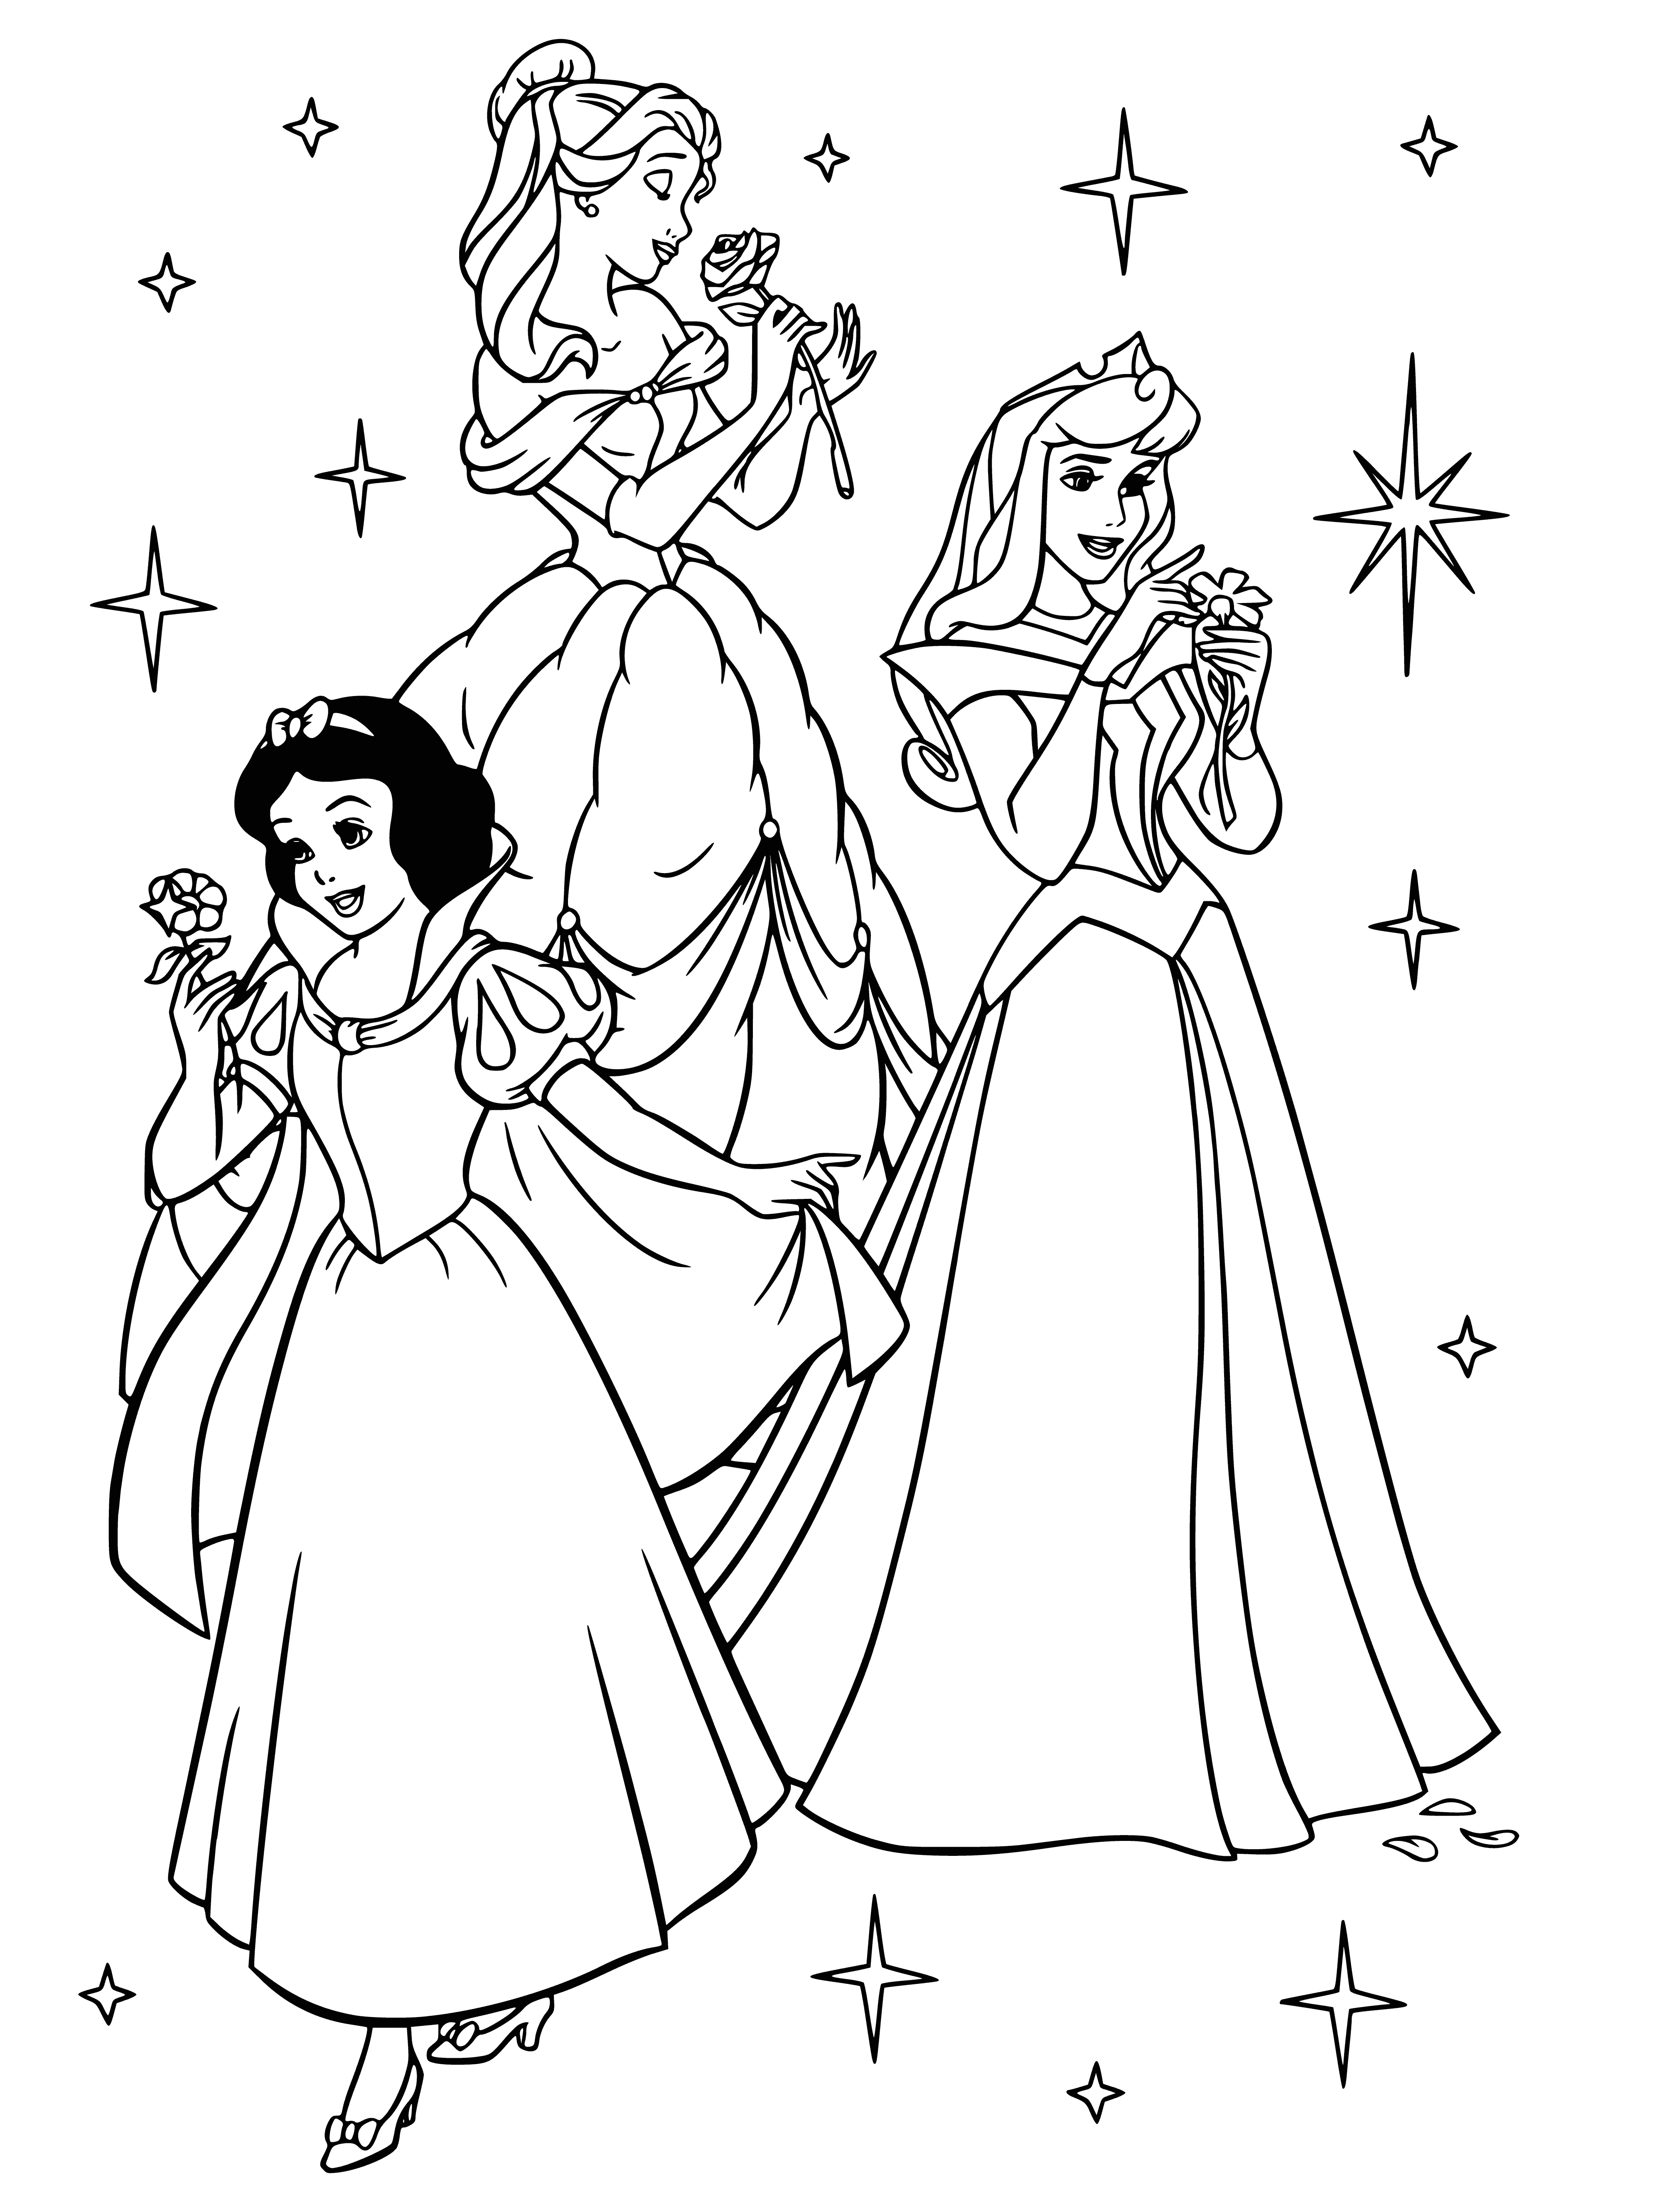 Snow White, Belle, Aurora coloring page